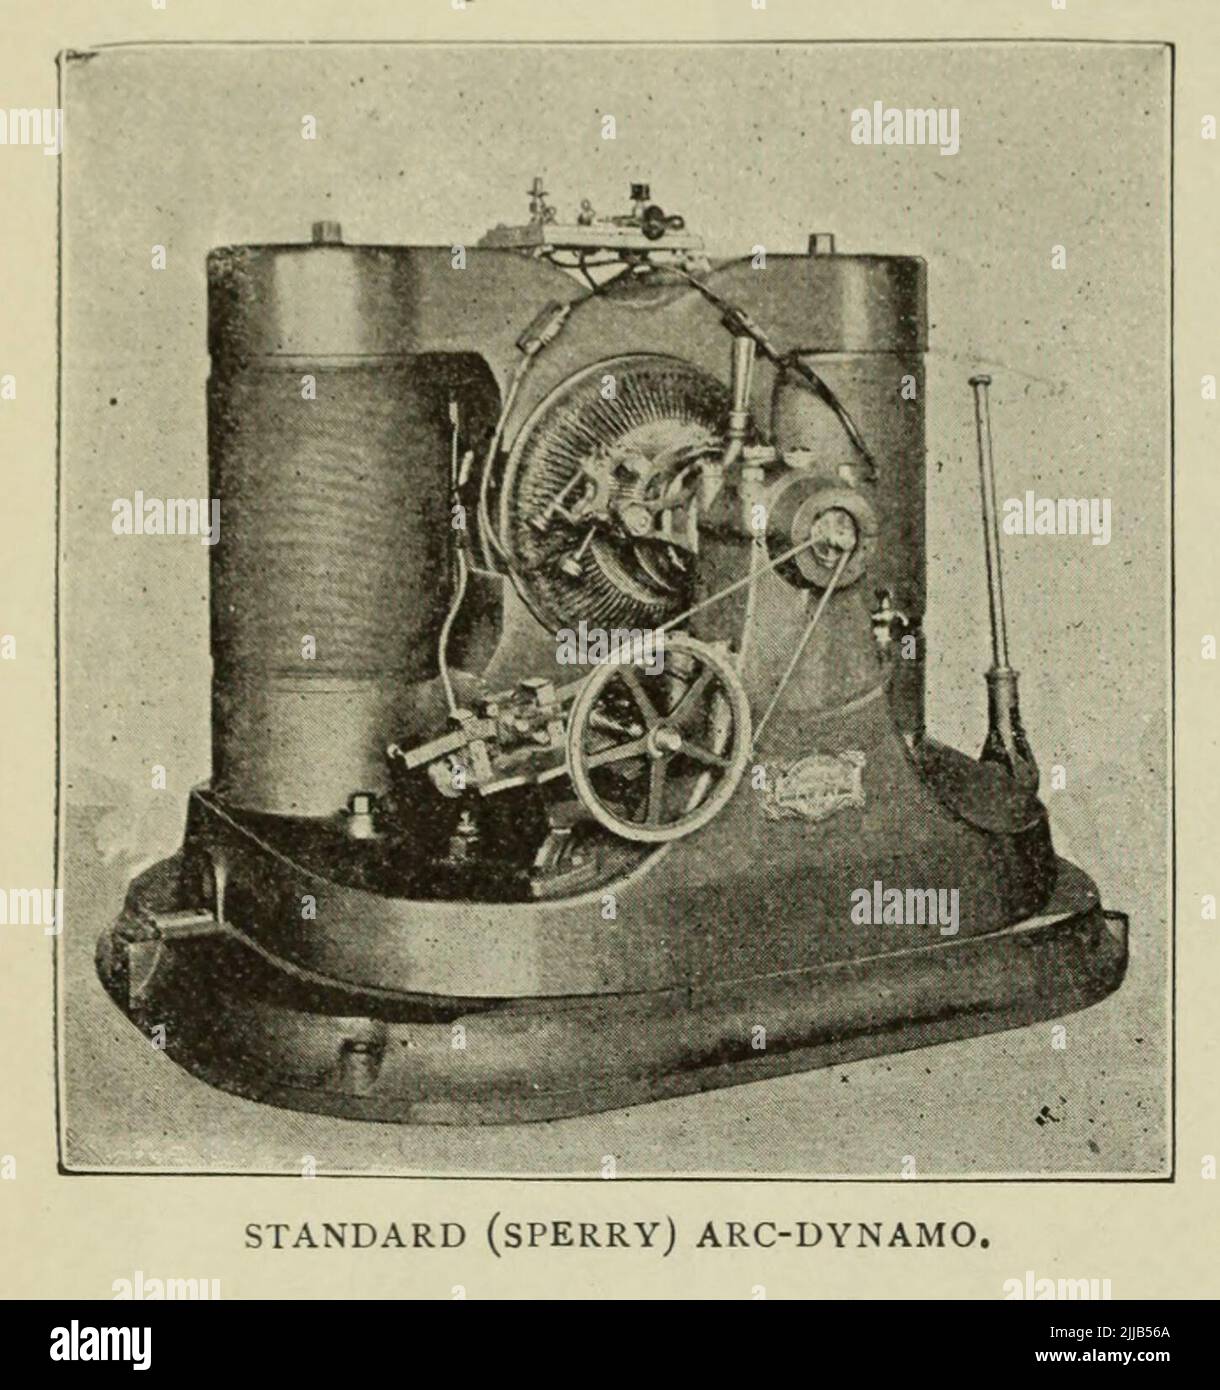 Standard (Sperry) Arc-Dynamo from the article ' BEGINNINGS AND FUTURE OF THE ARC-LAMP ' by S. M. Hamill  from The Engineering Magazine DEVOTED TO INDUSTRIAL PROGRESS Volume VII April to September, 1894 NEW YORK The Engineering Magazine Co Stock Photo